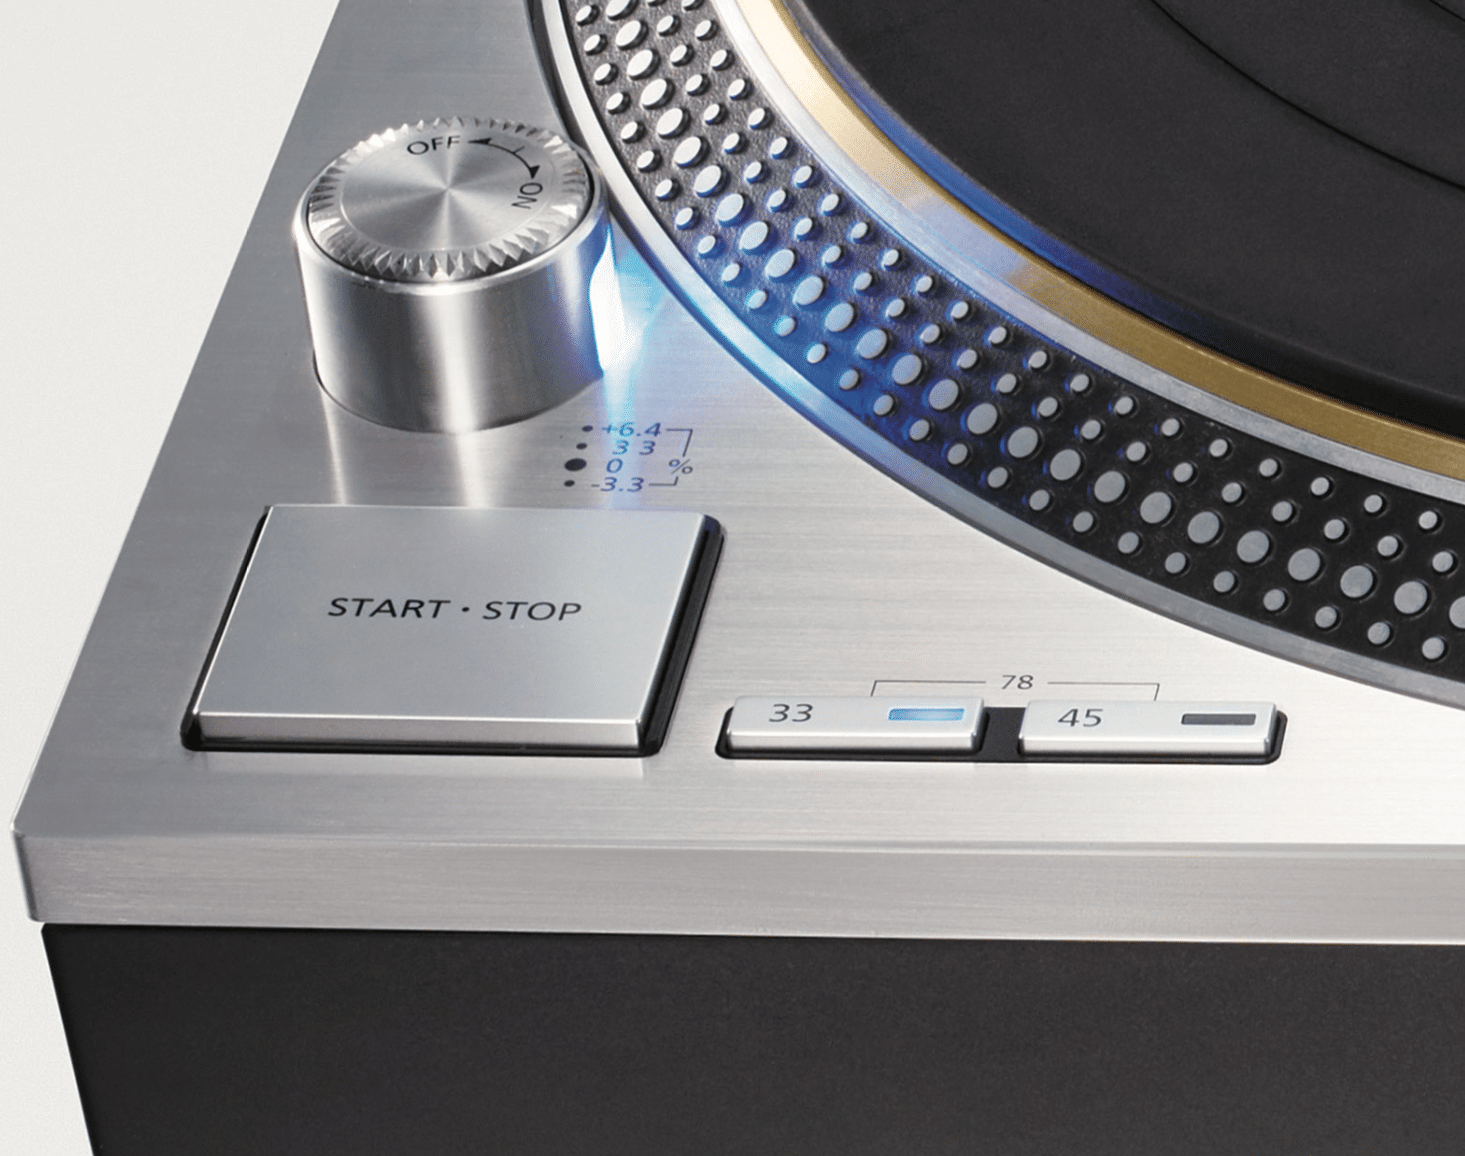 SL-1200G FROM TECHNICS: AN AUDIOPHILE REVIEW